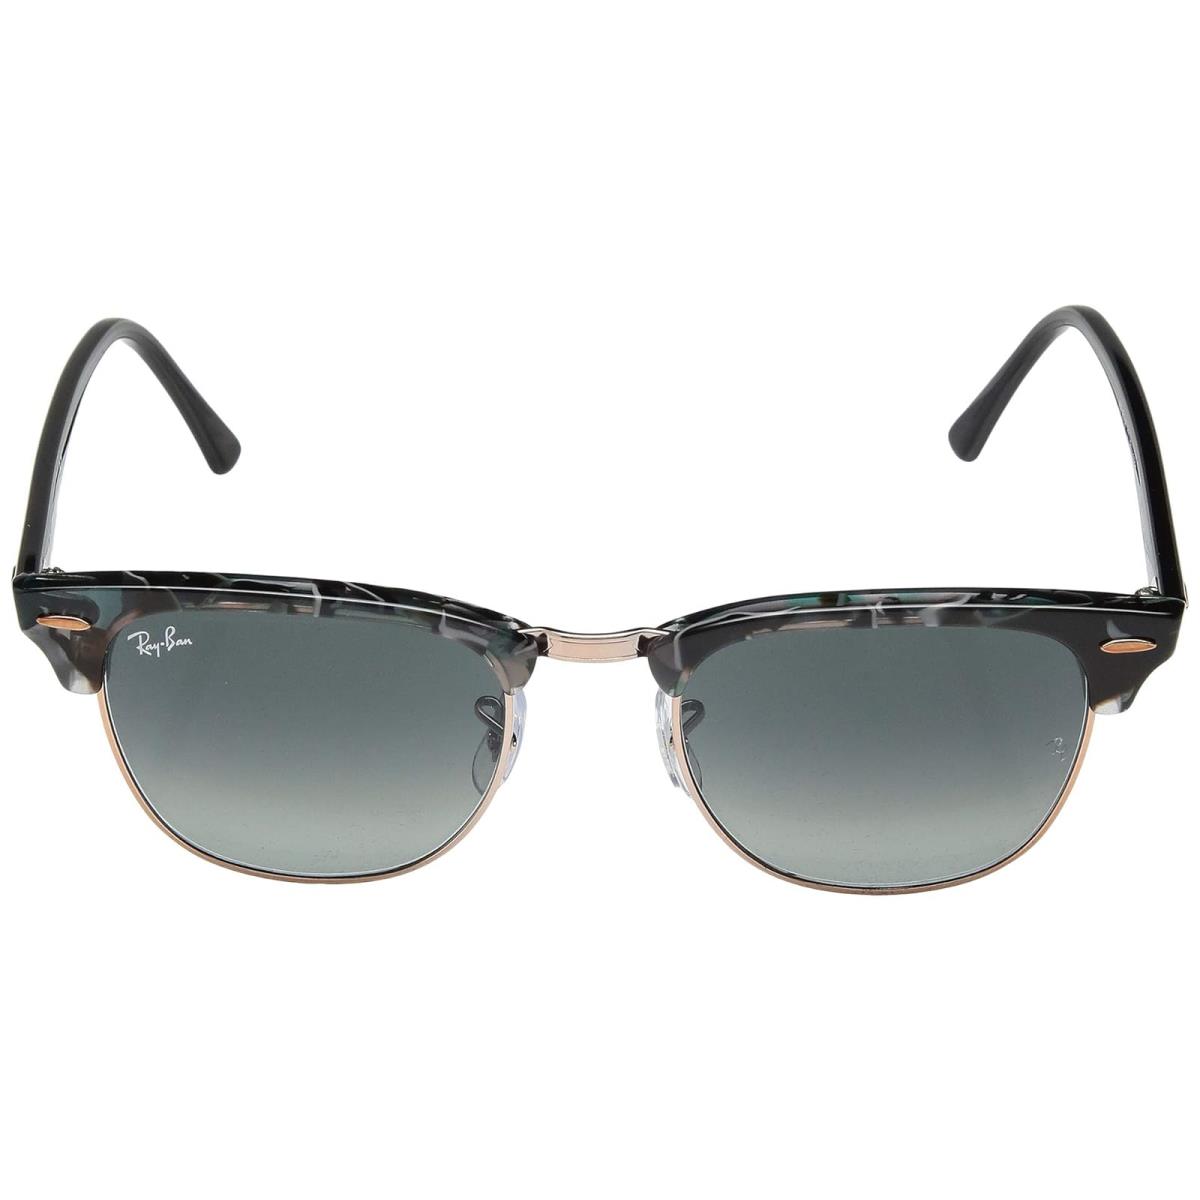 Man`s Sunglasses Ray-ban RB3016 Clubmaster Gradient Sunglasses